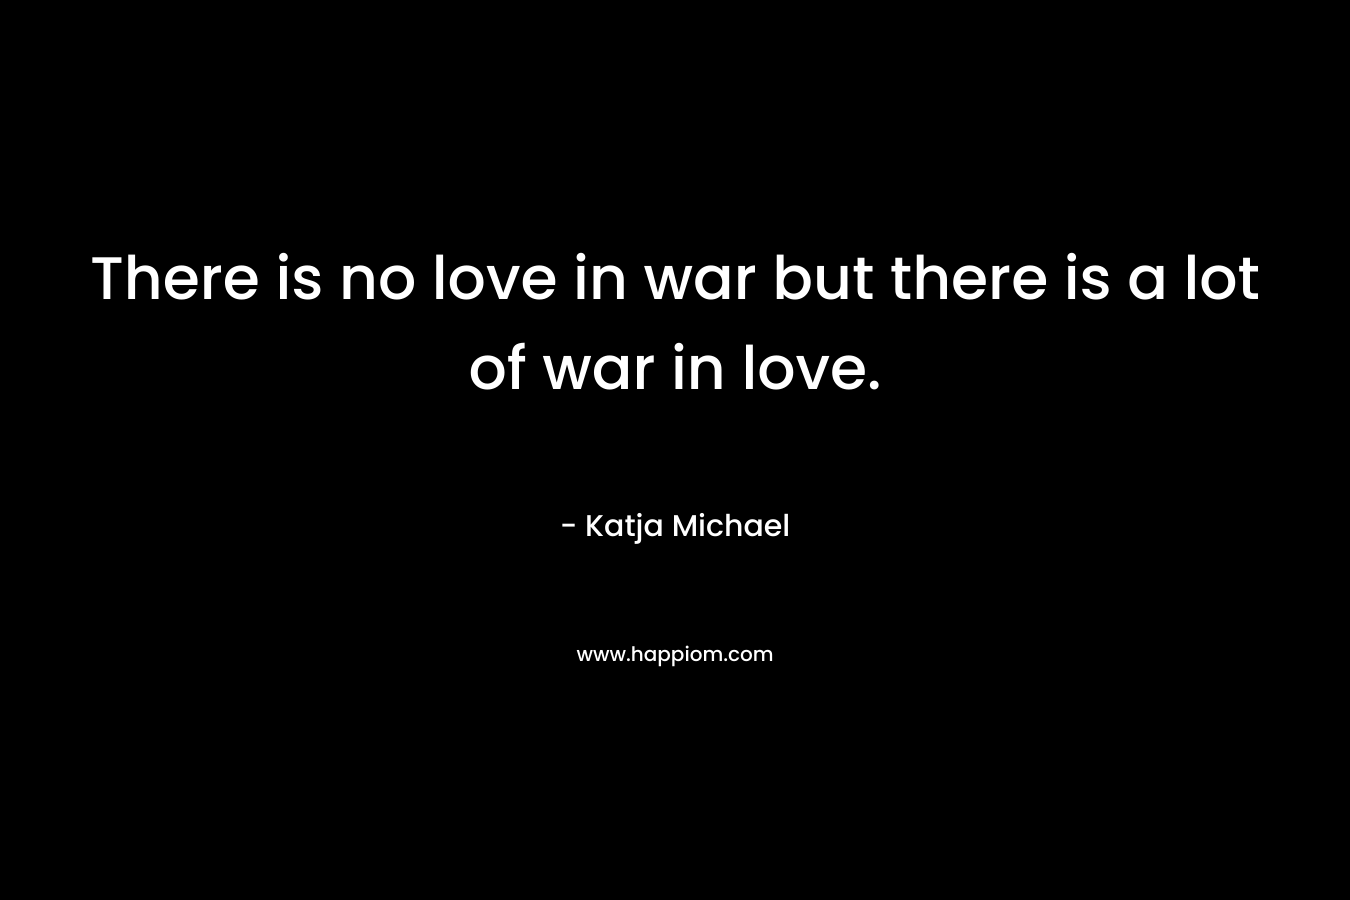 There is no love in war but there is a lot of war in love. – Katja Michael